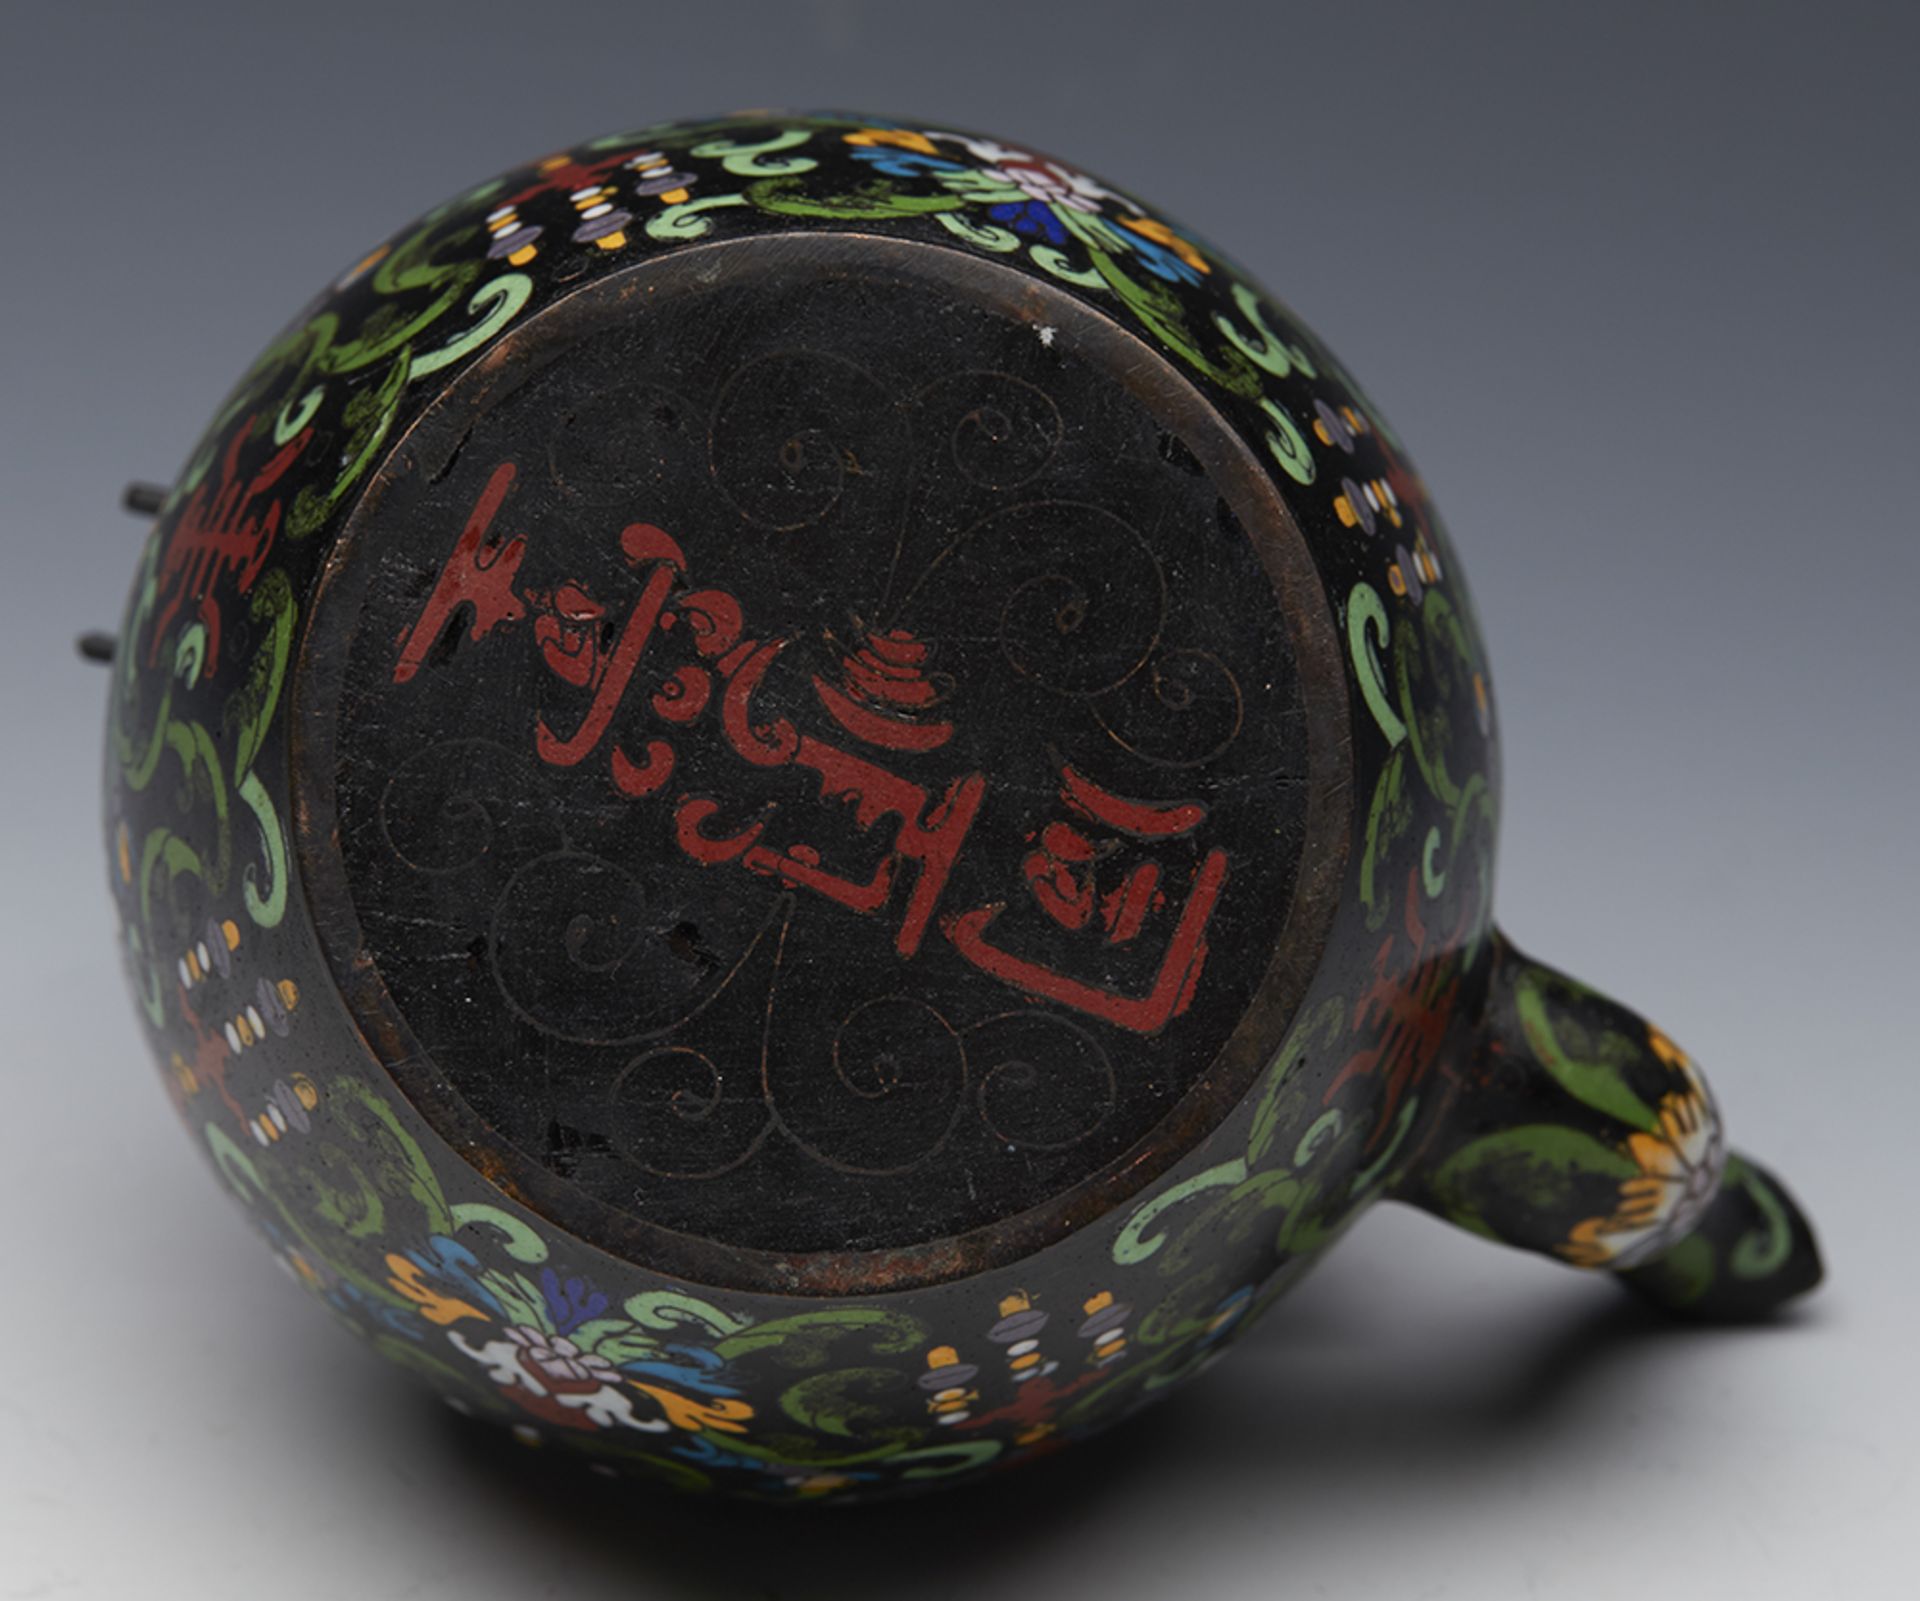 Fine Antique Chinese Qing Cloisonne Wine Pot Marked Tong Shun Tang 19Th C. - Image 6 of 10